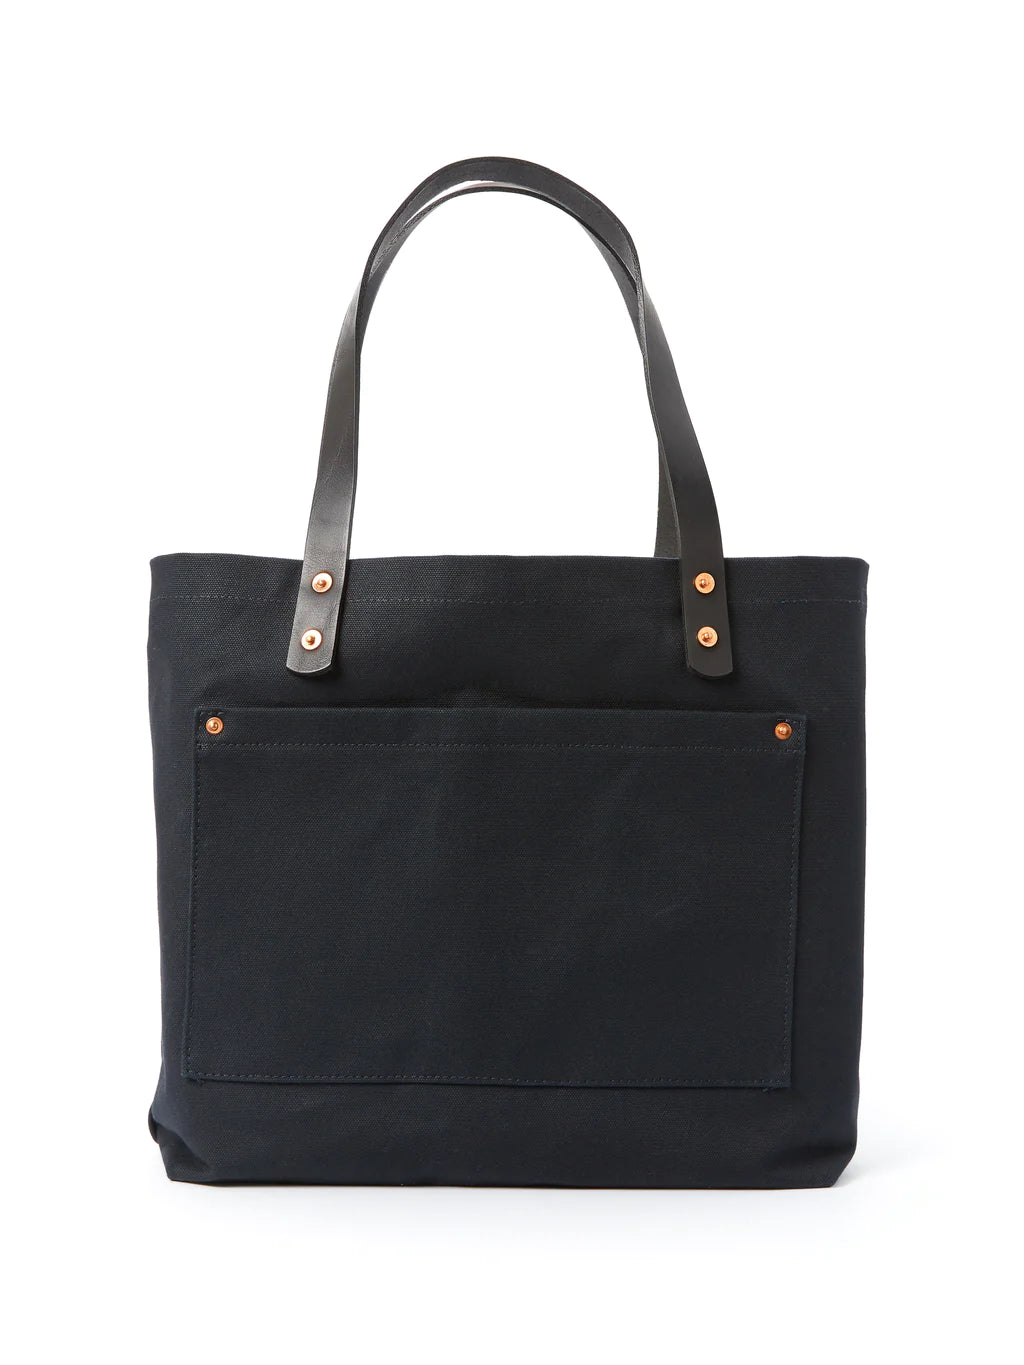 DAILY - Canvas Tote Bag